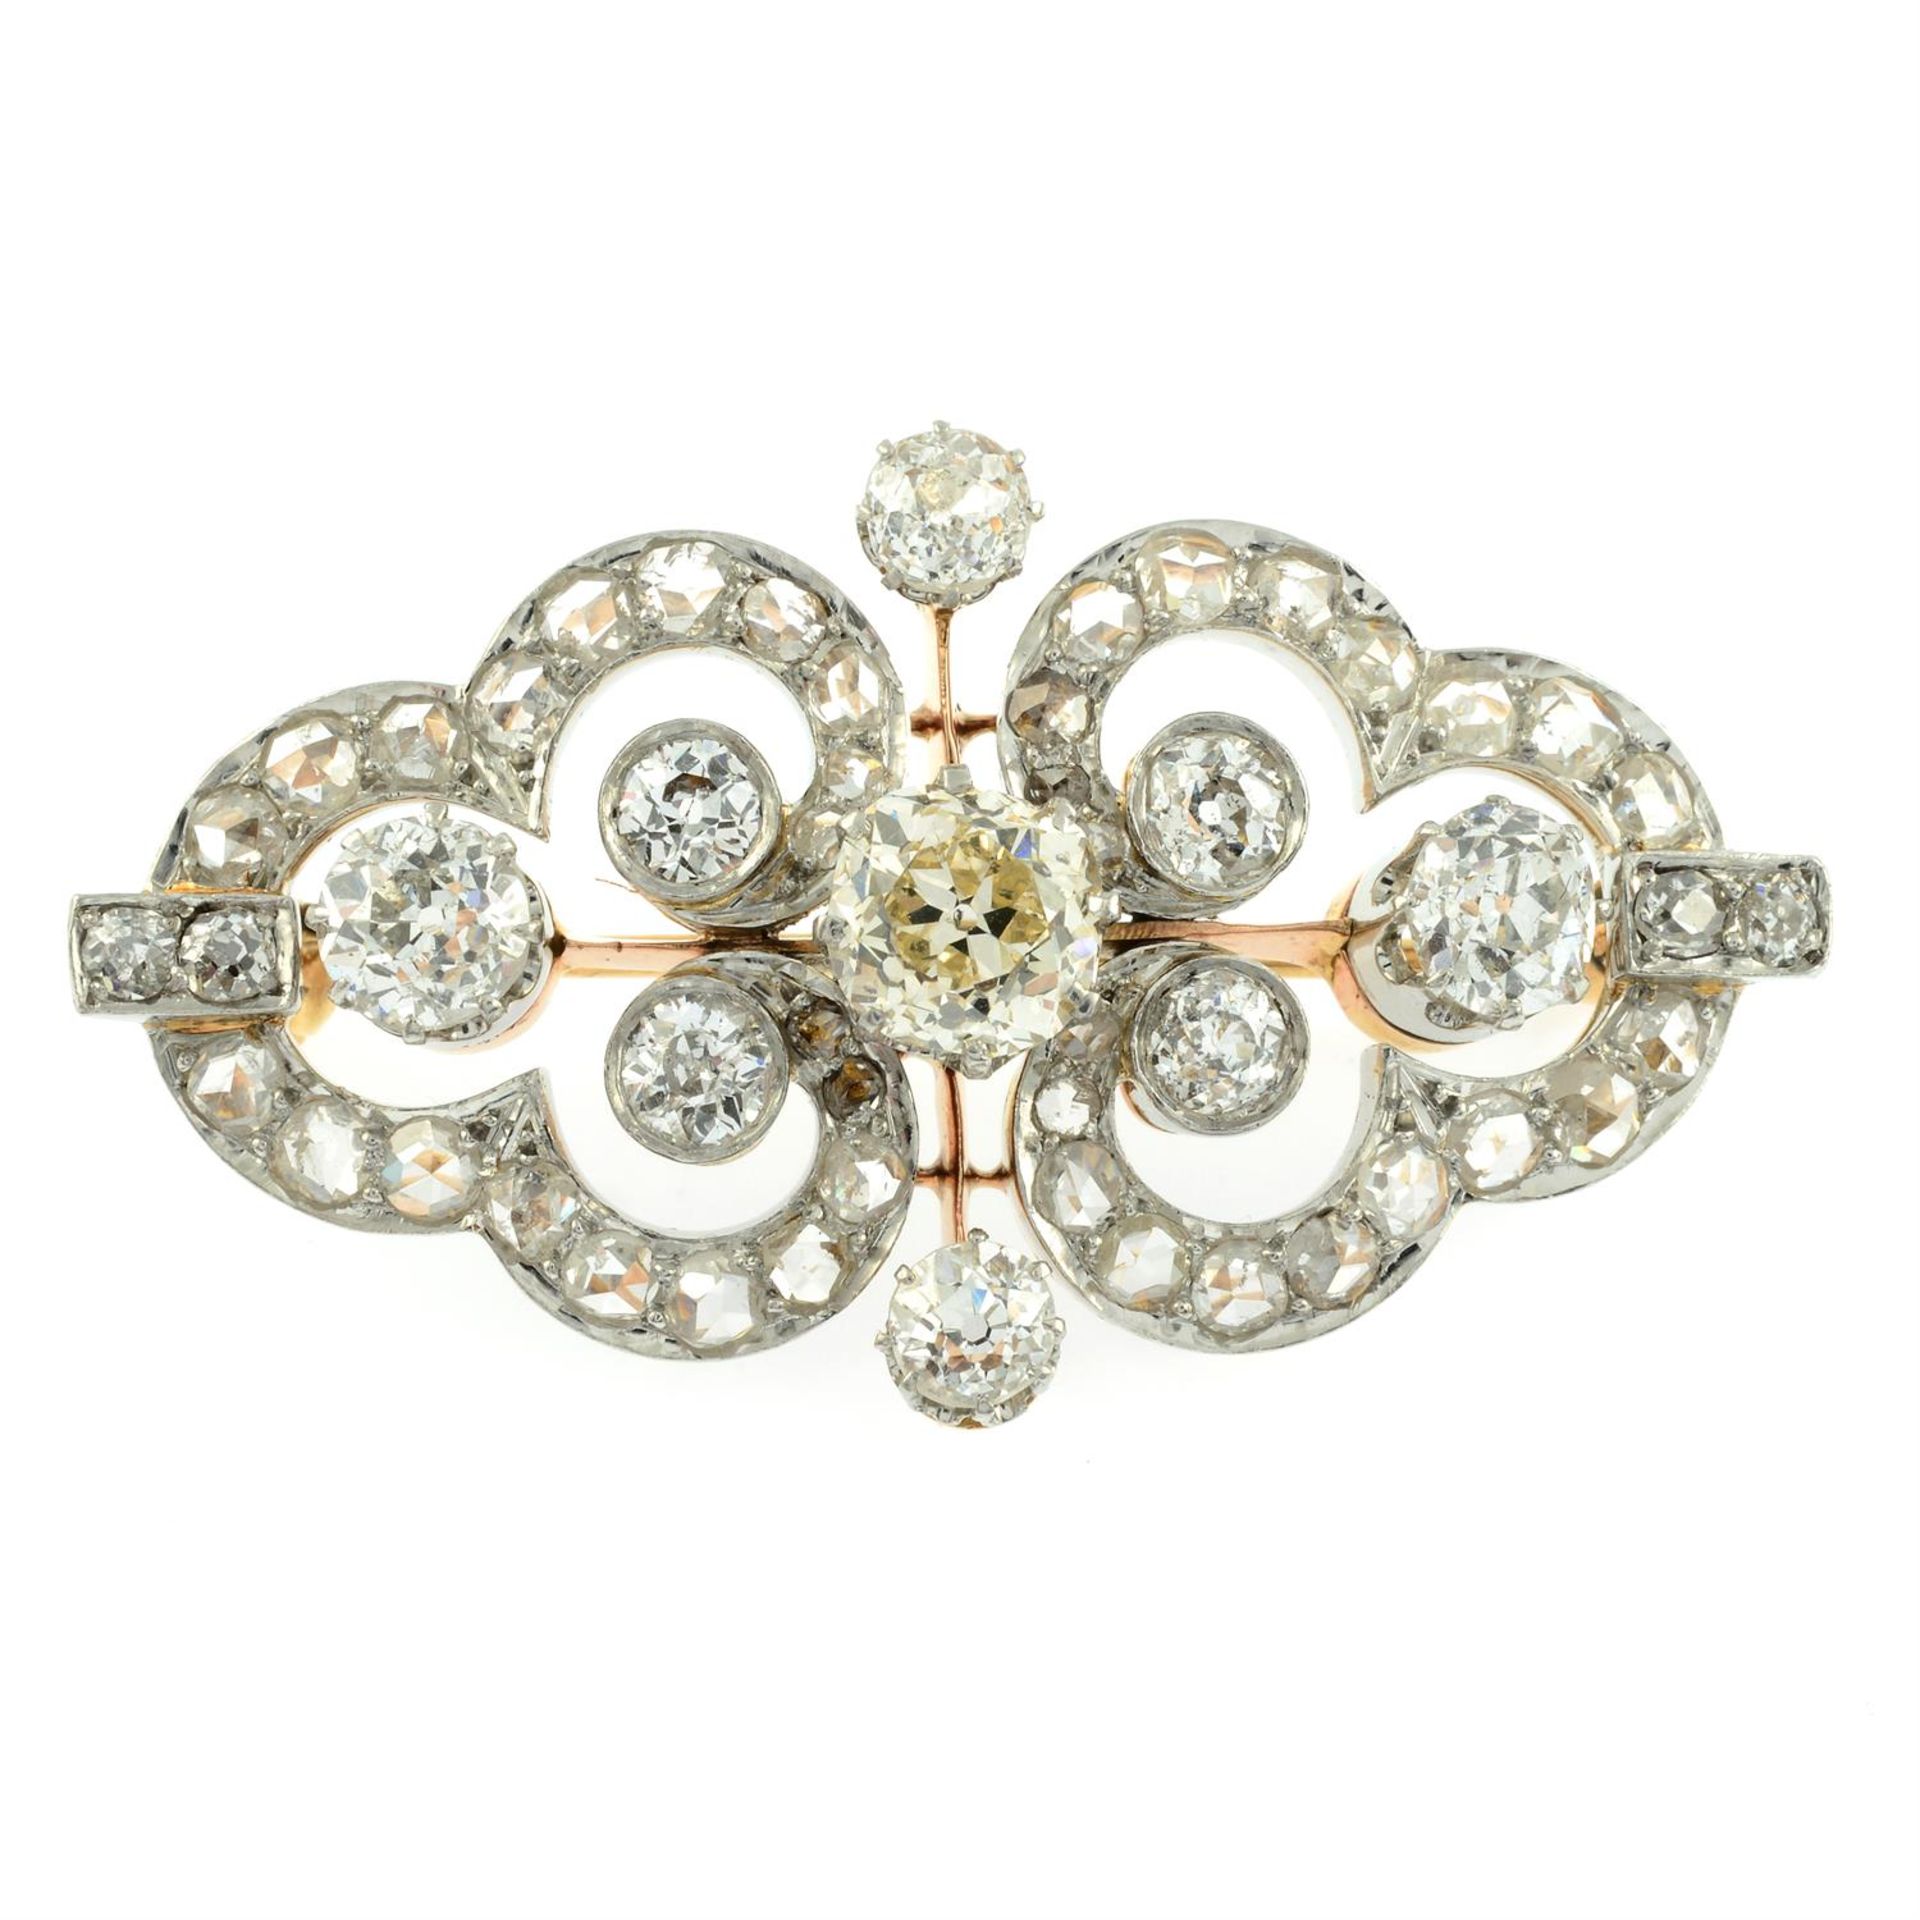 An early 20th century platinum and gold old and rose-cut diamond brooch. - Image 2 of 4